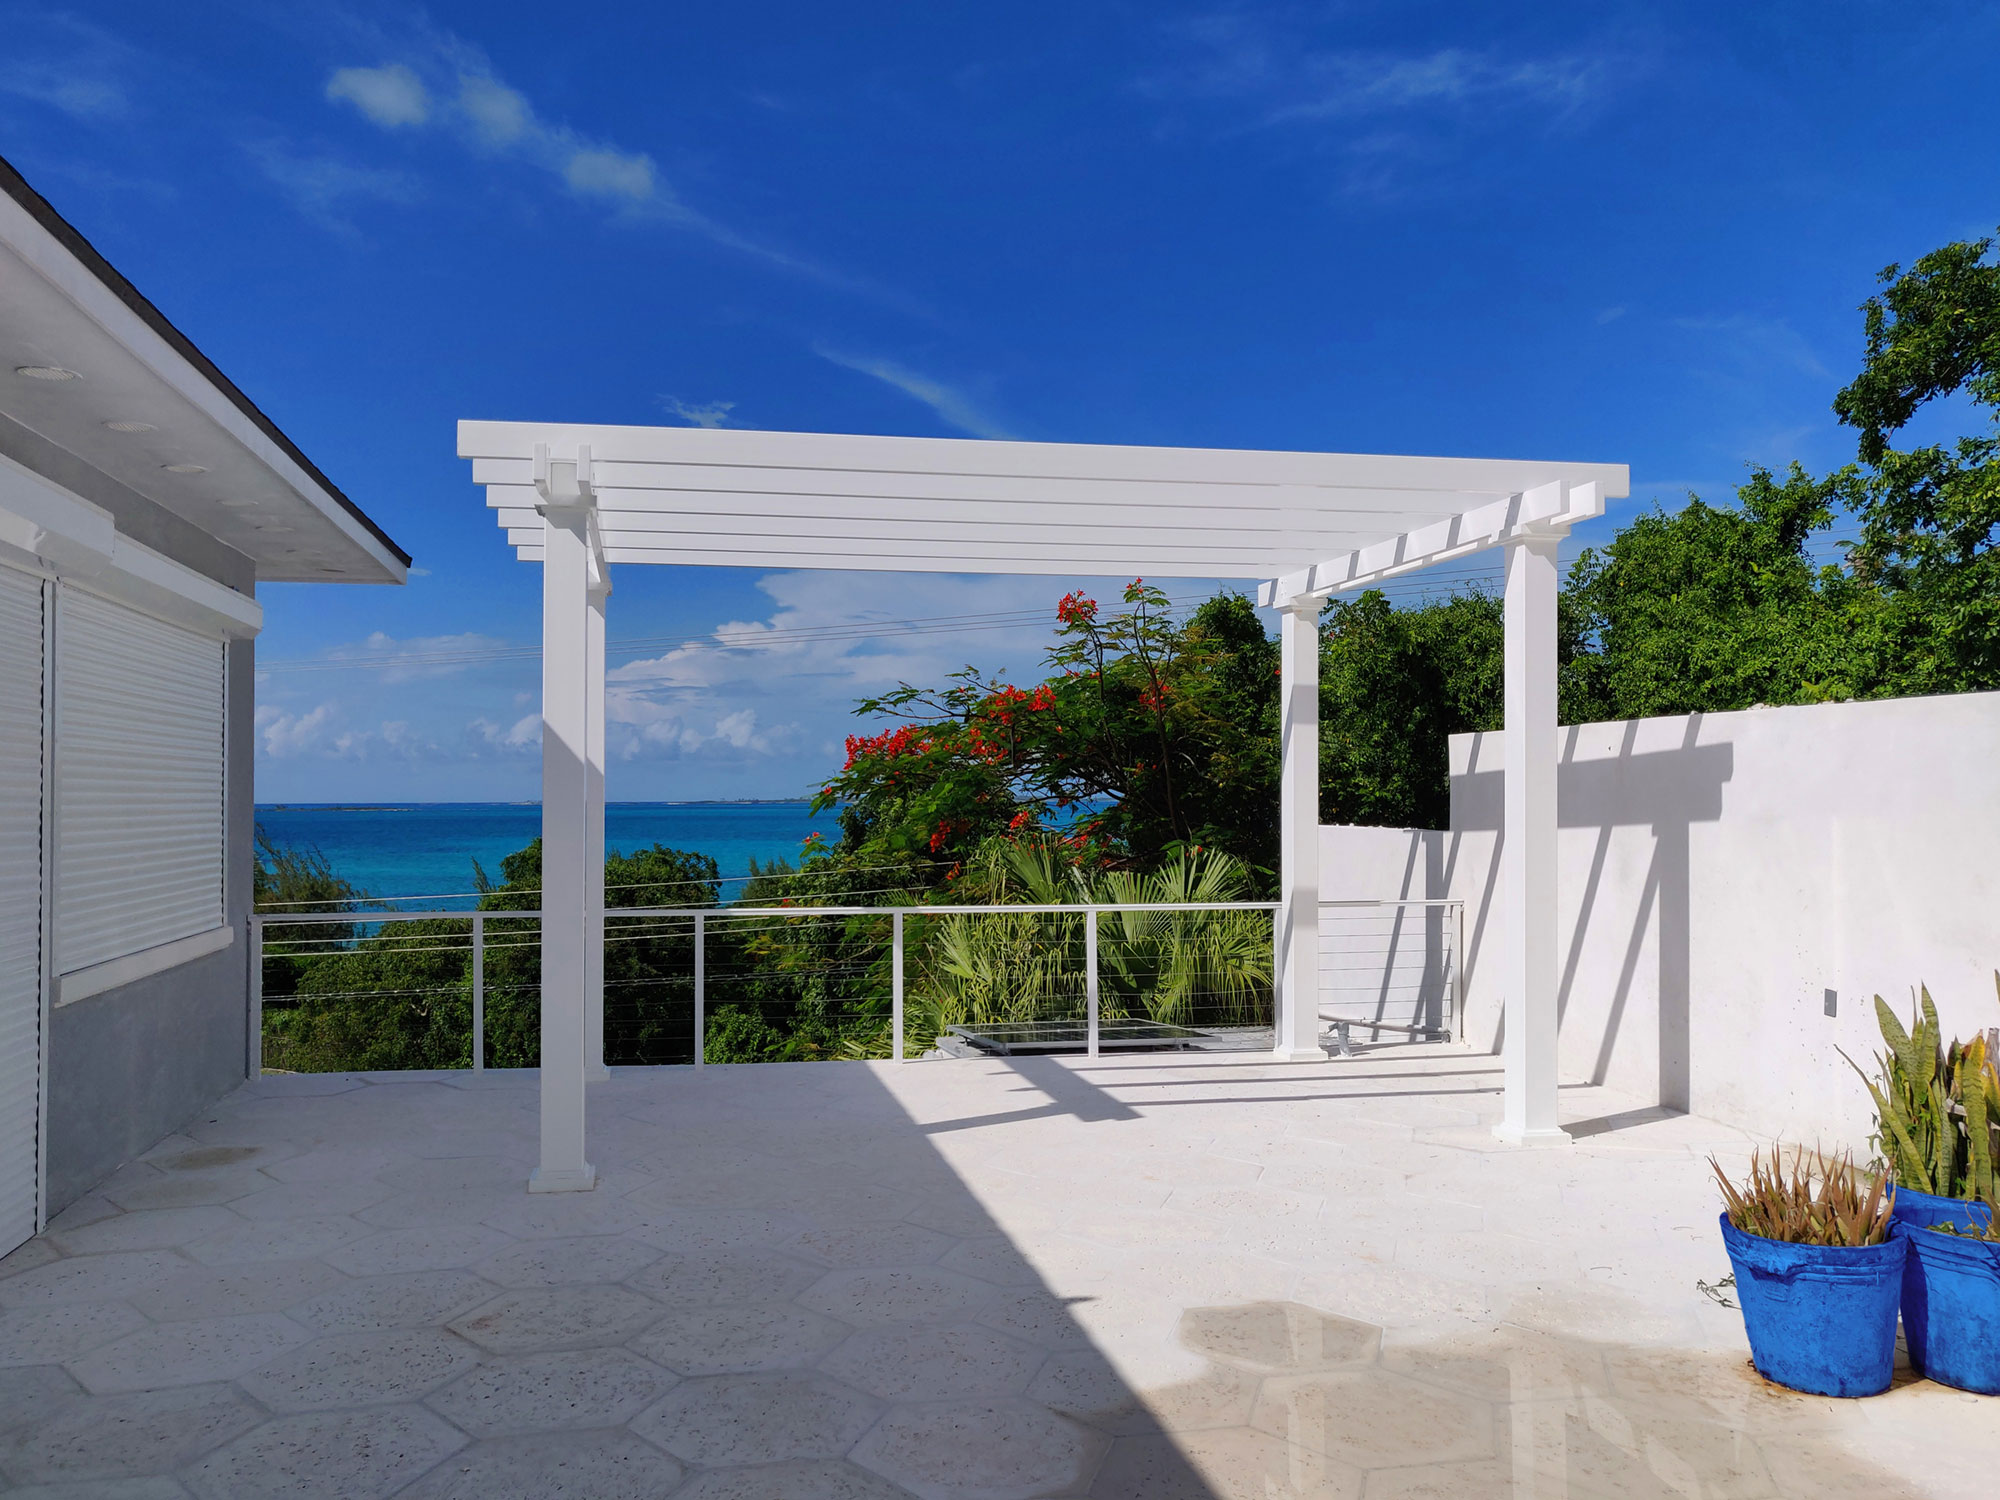 Freestanding white vinyl pergola on a tropical patio. Pergola has no roof just beams for decoration.